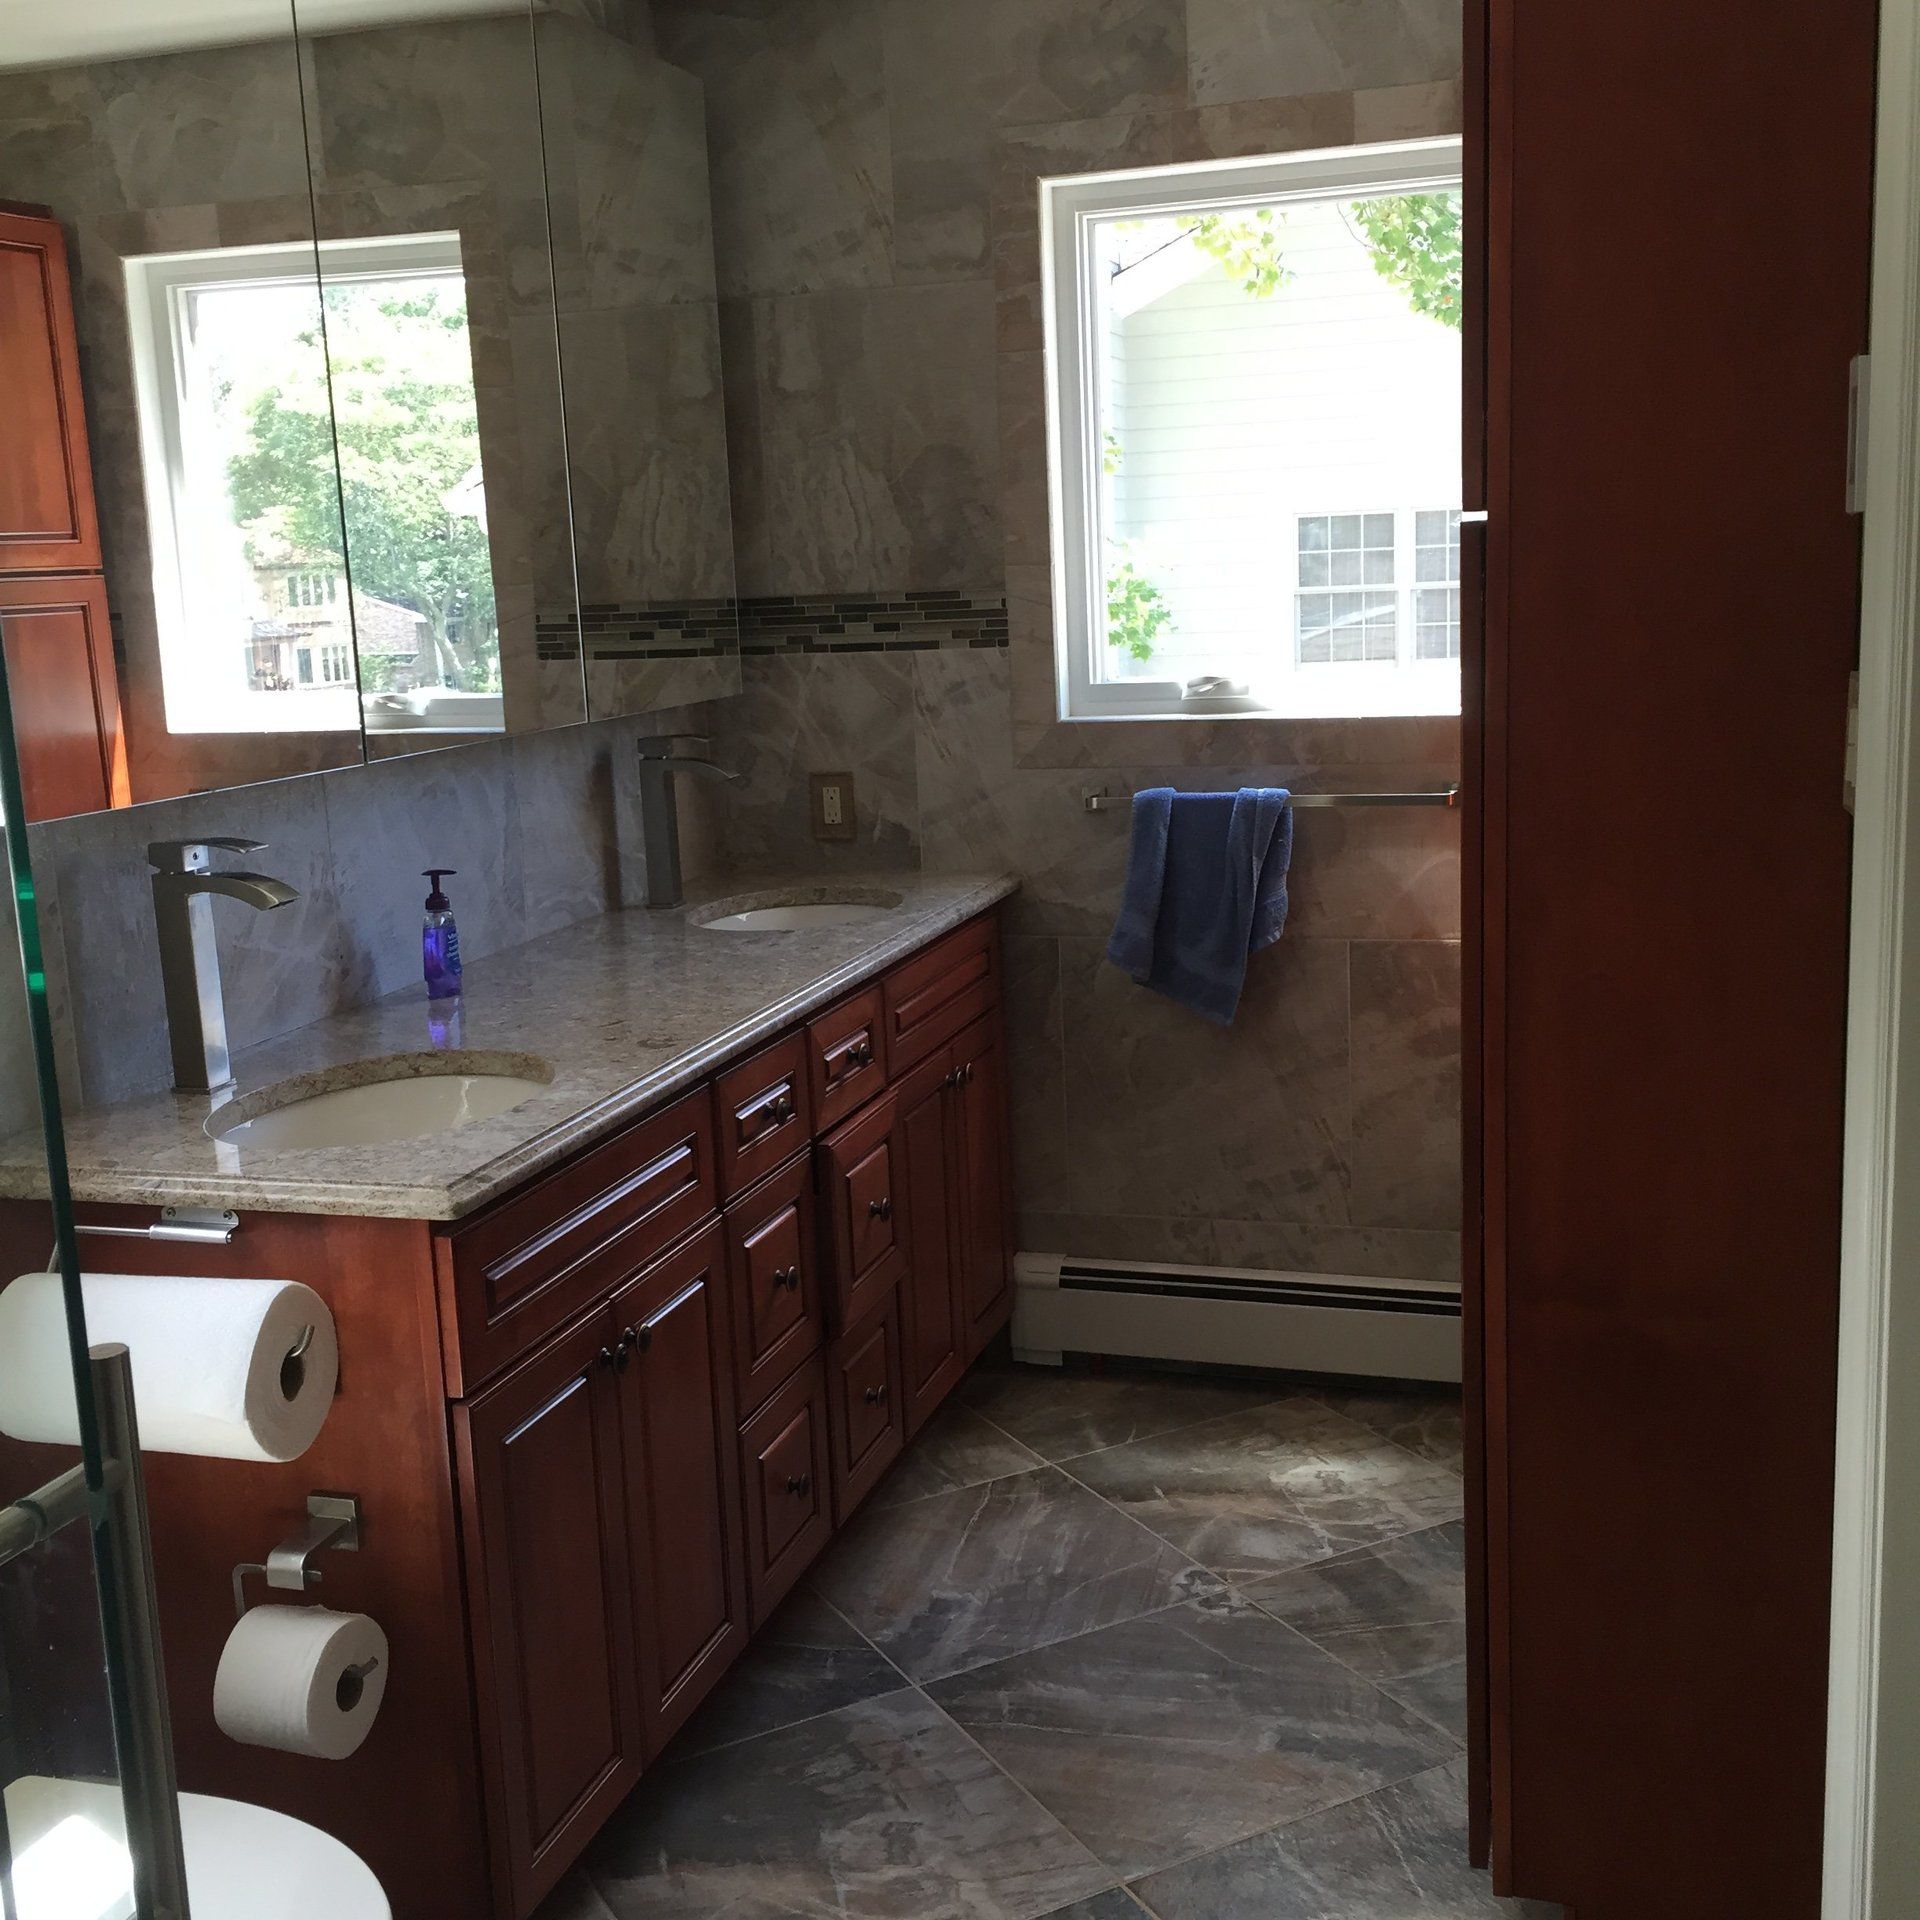 remodeled bathroom with new cabinetry, flooring, and countertops